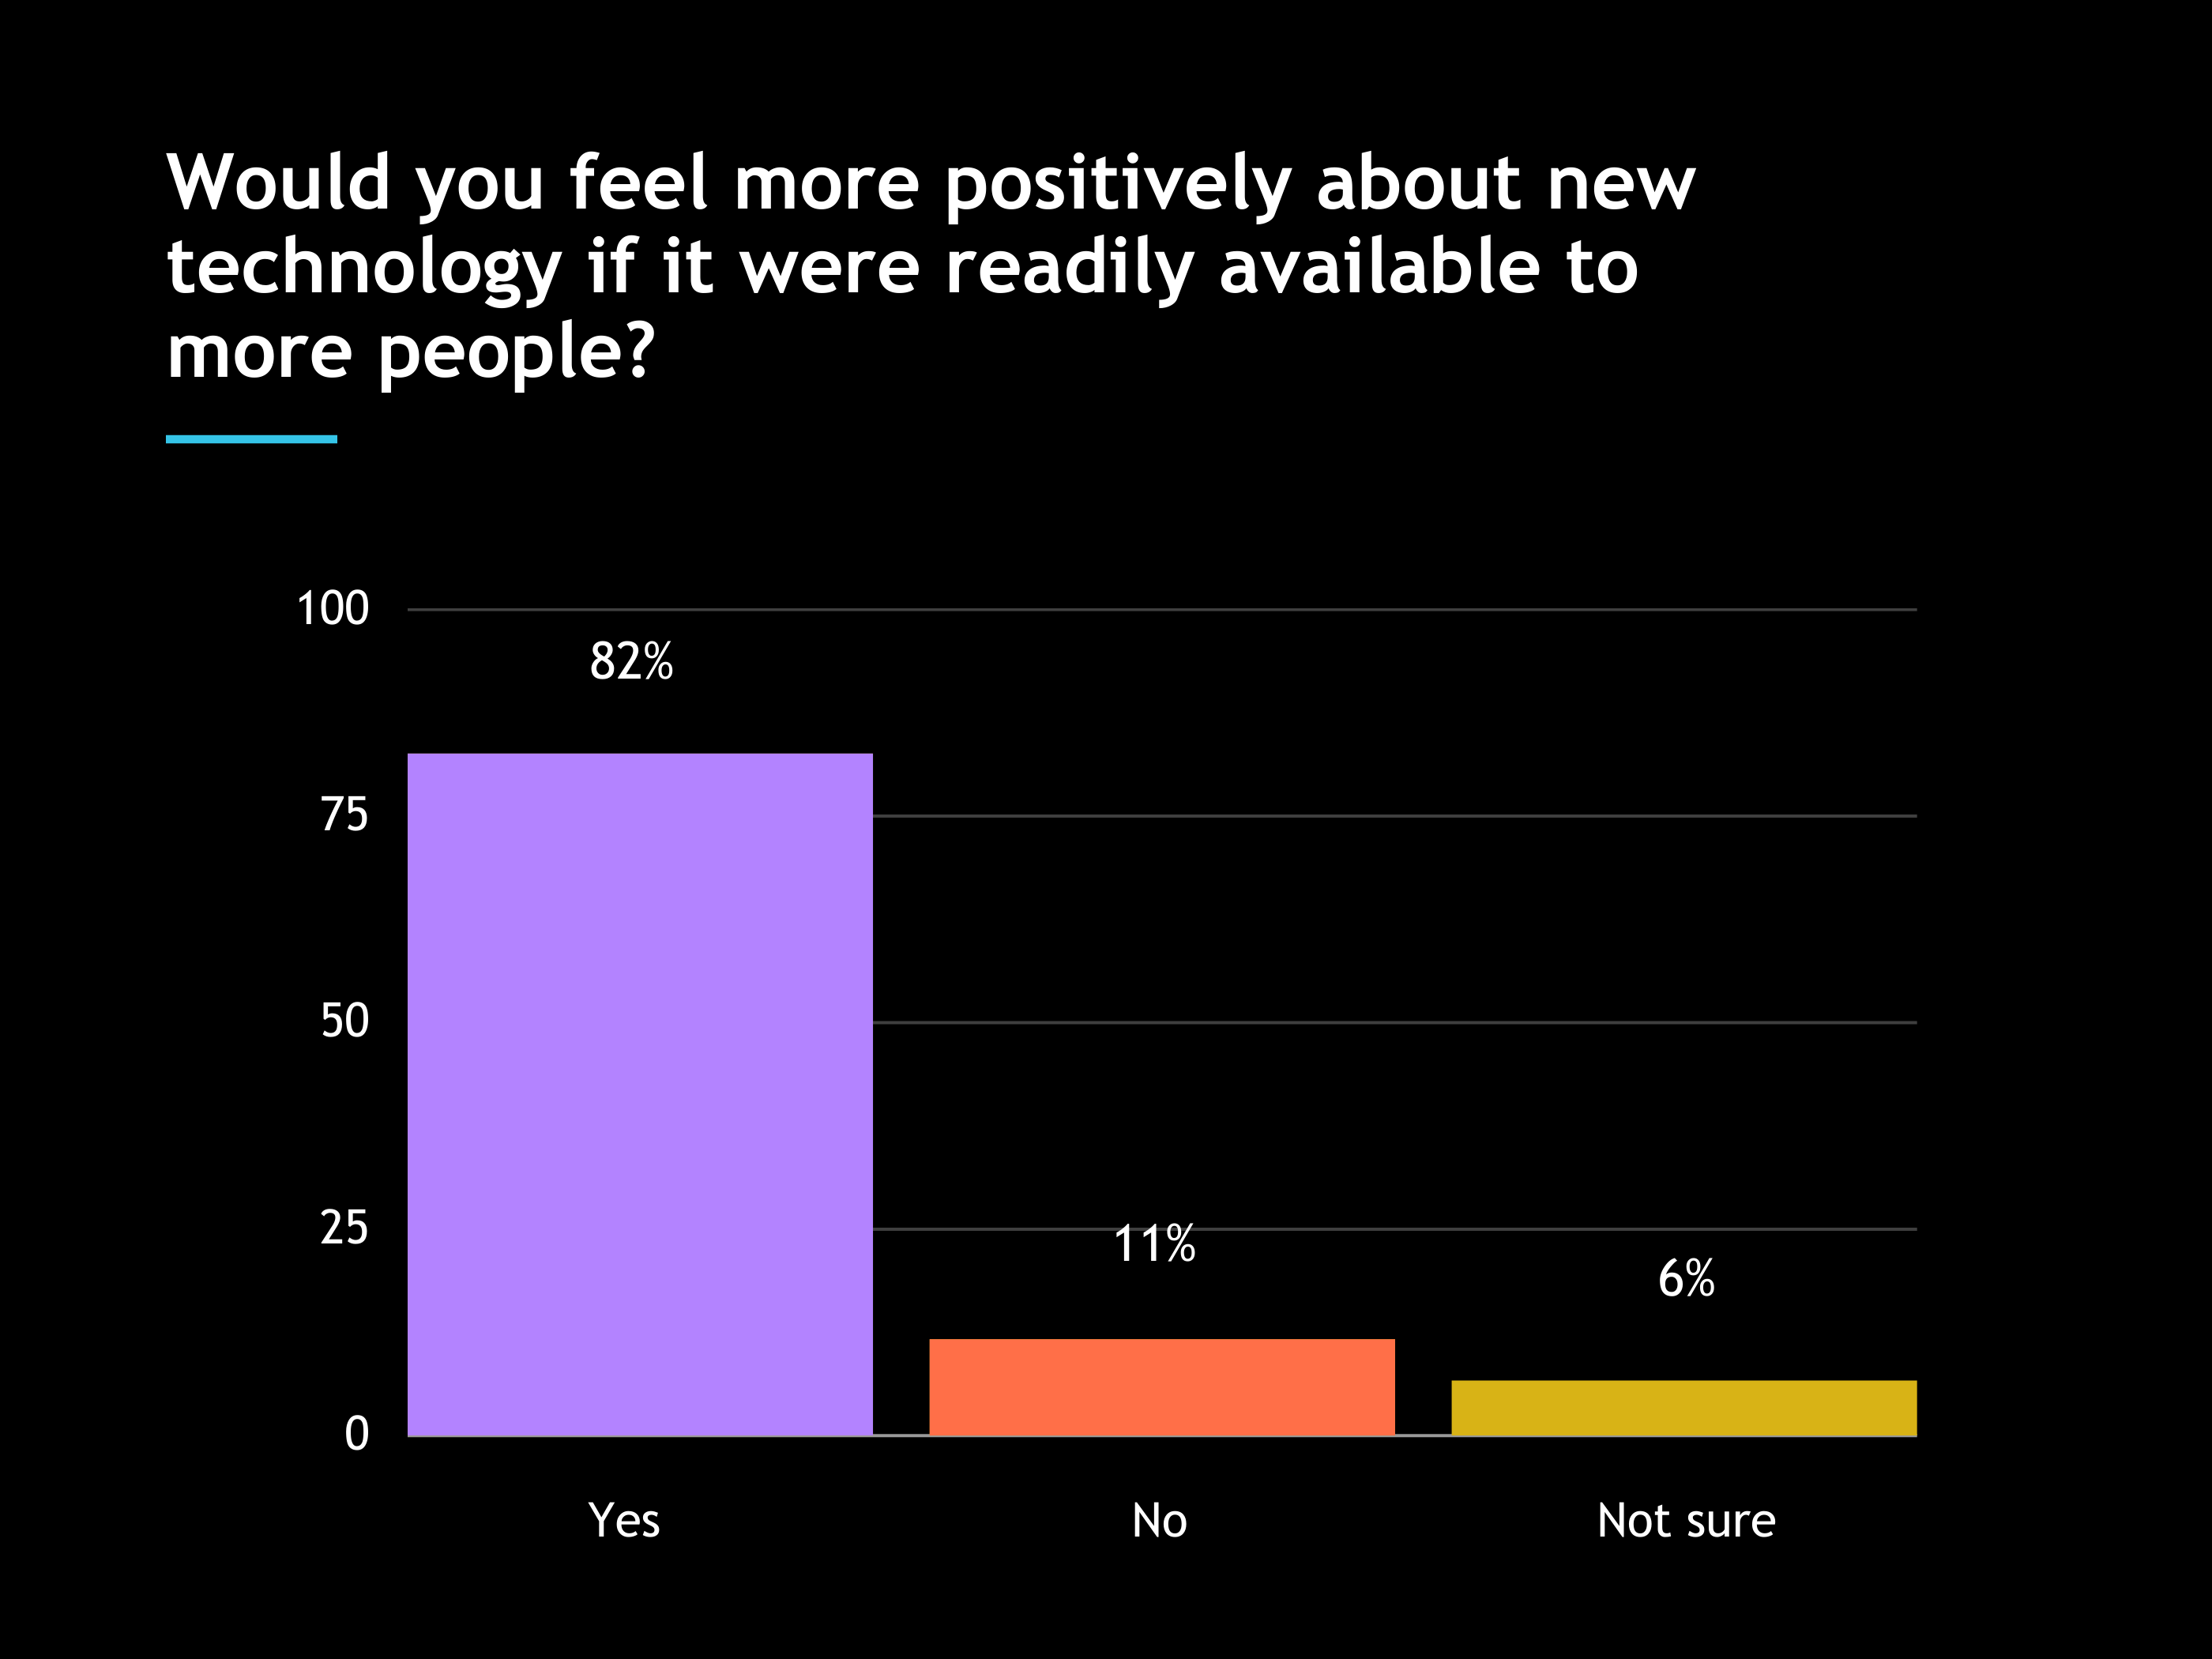 Would you feel more positively about new technology if it were readily available to more people